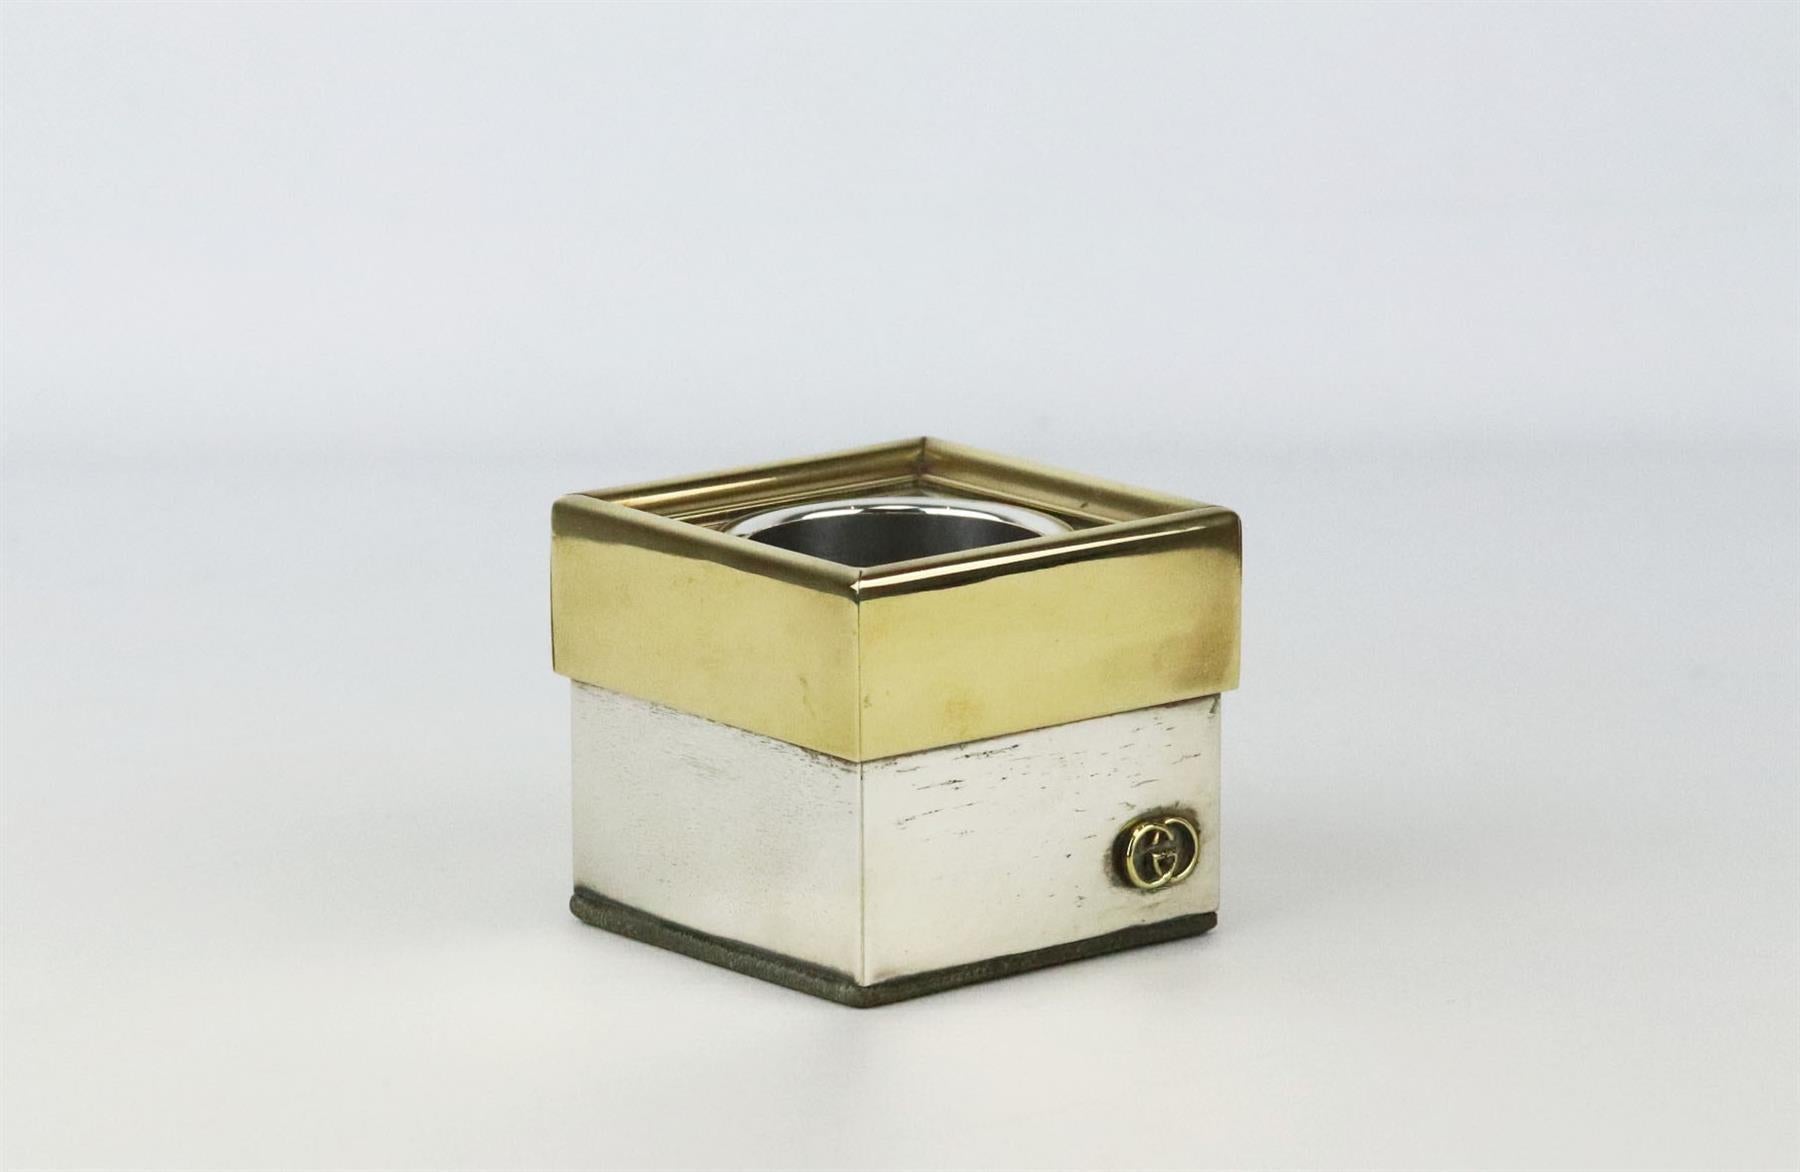 This Vintage cigarette holder by Gucci is made from silver and gold tone metal in a square shape and GG detail, store your cigarettes upright inside. Does not come with box. Dimensions: H 2.5 x W 2.5 inches
